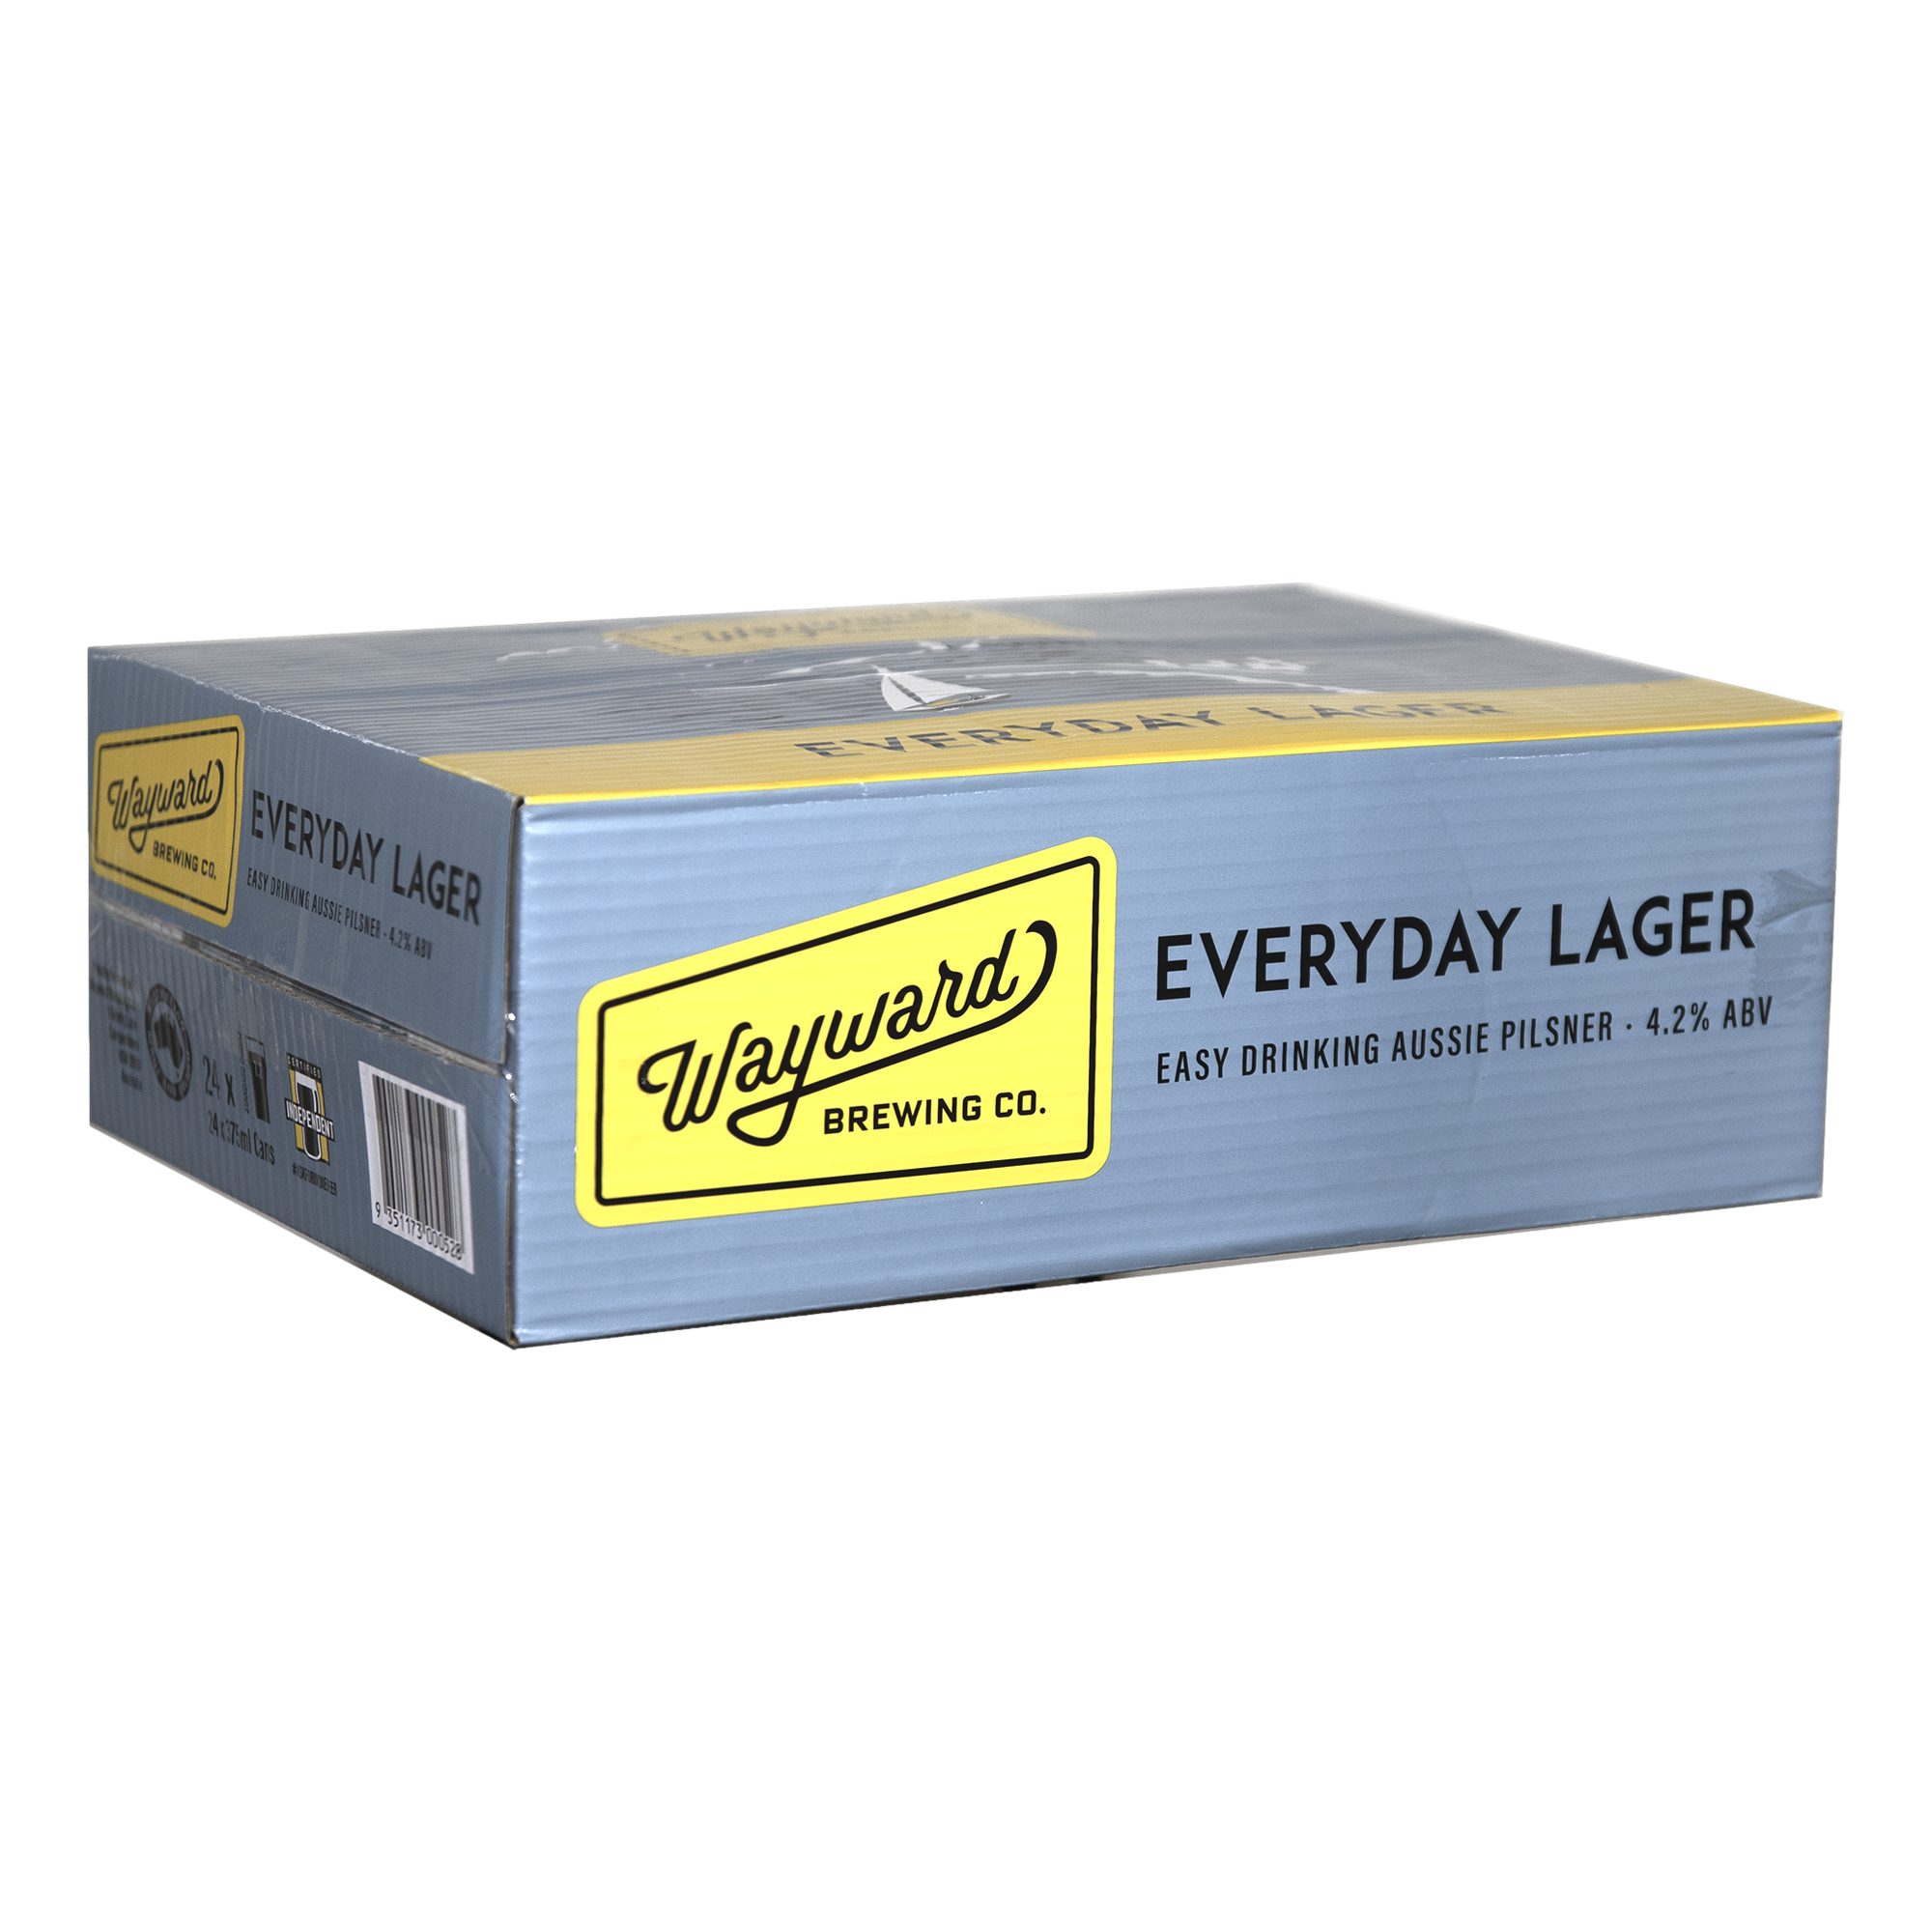 Wayward Everyday Lager 375ml Can Case of 24